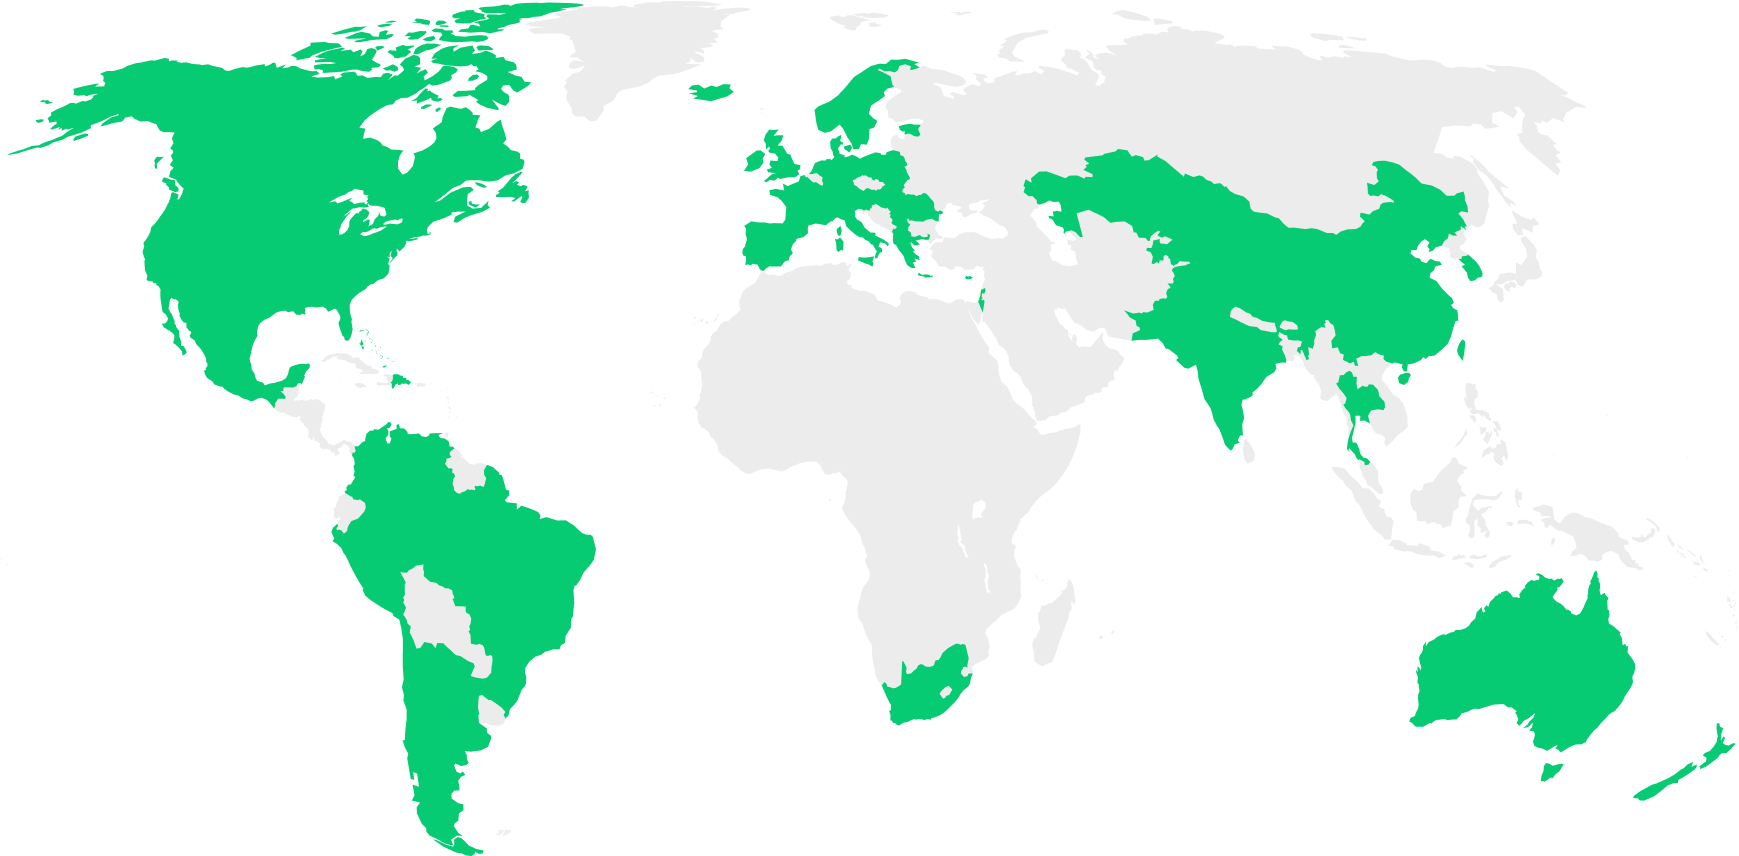 World map showing international calling countries.